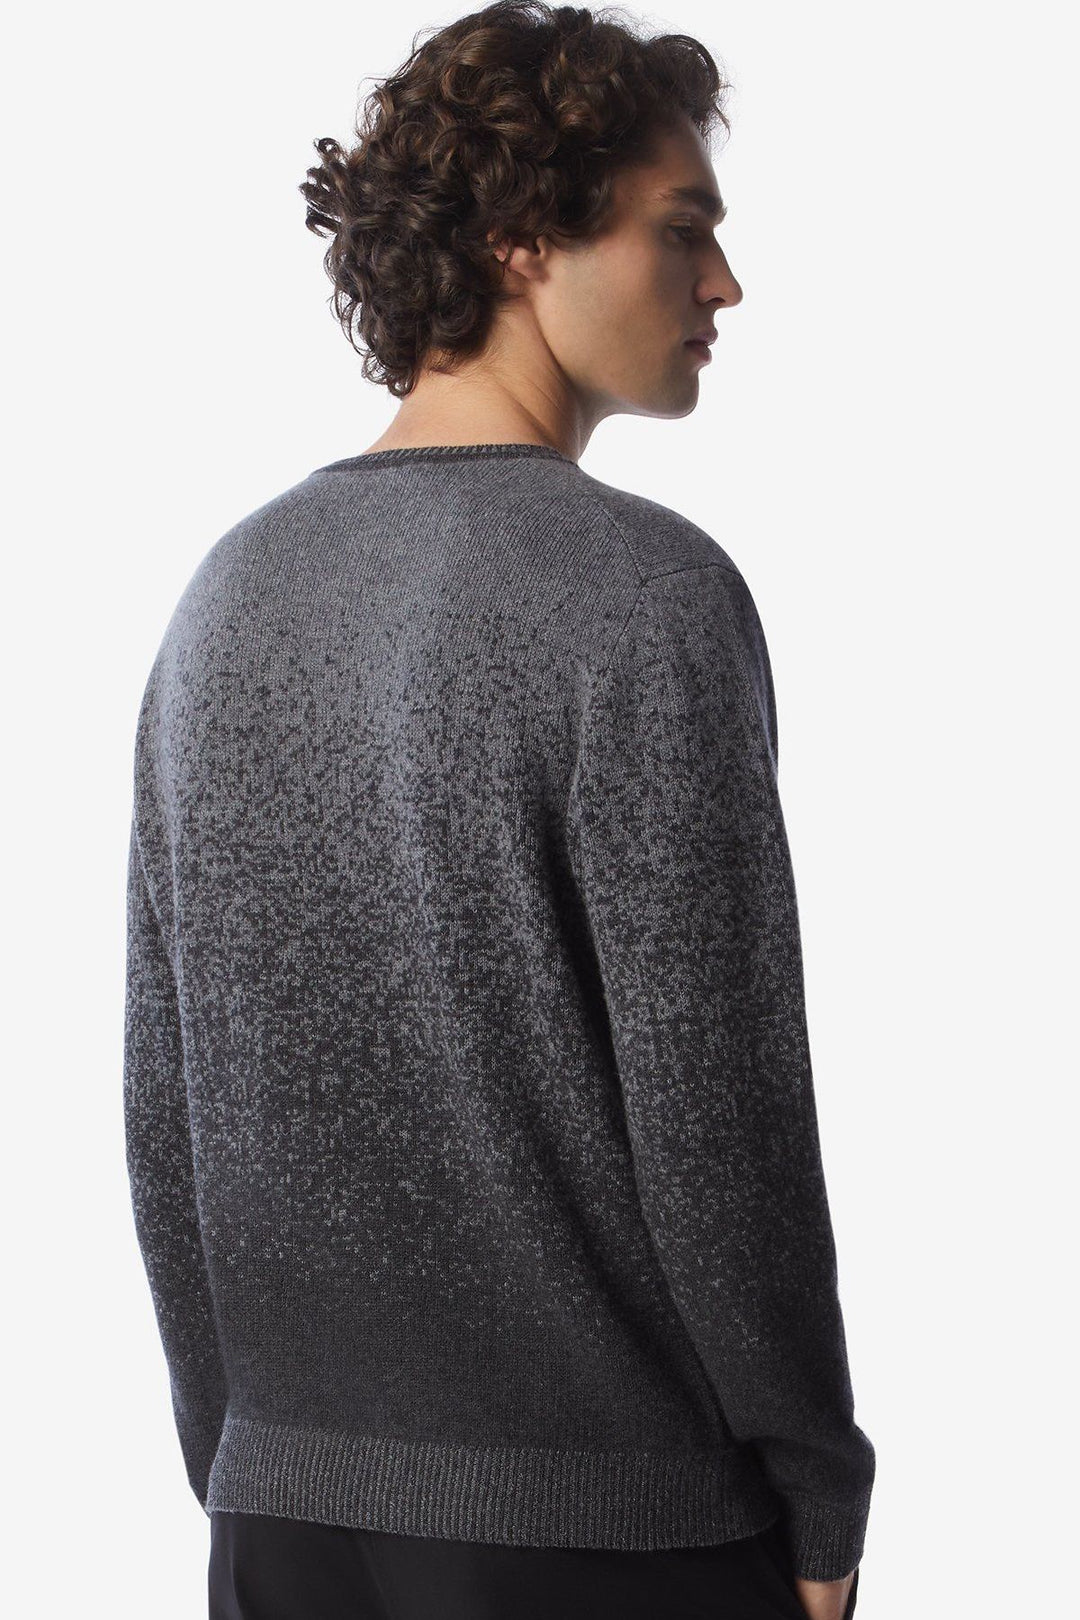 Wool and cashmere sweater with gray pixel pattern